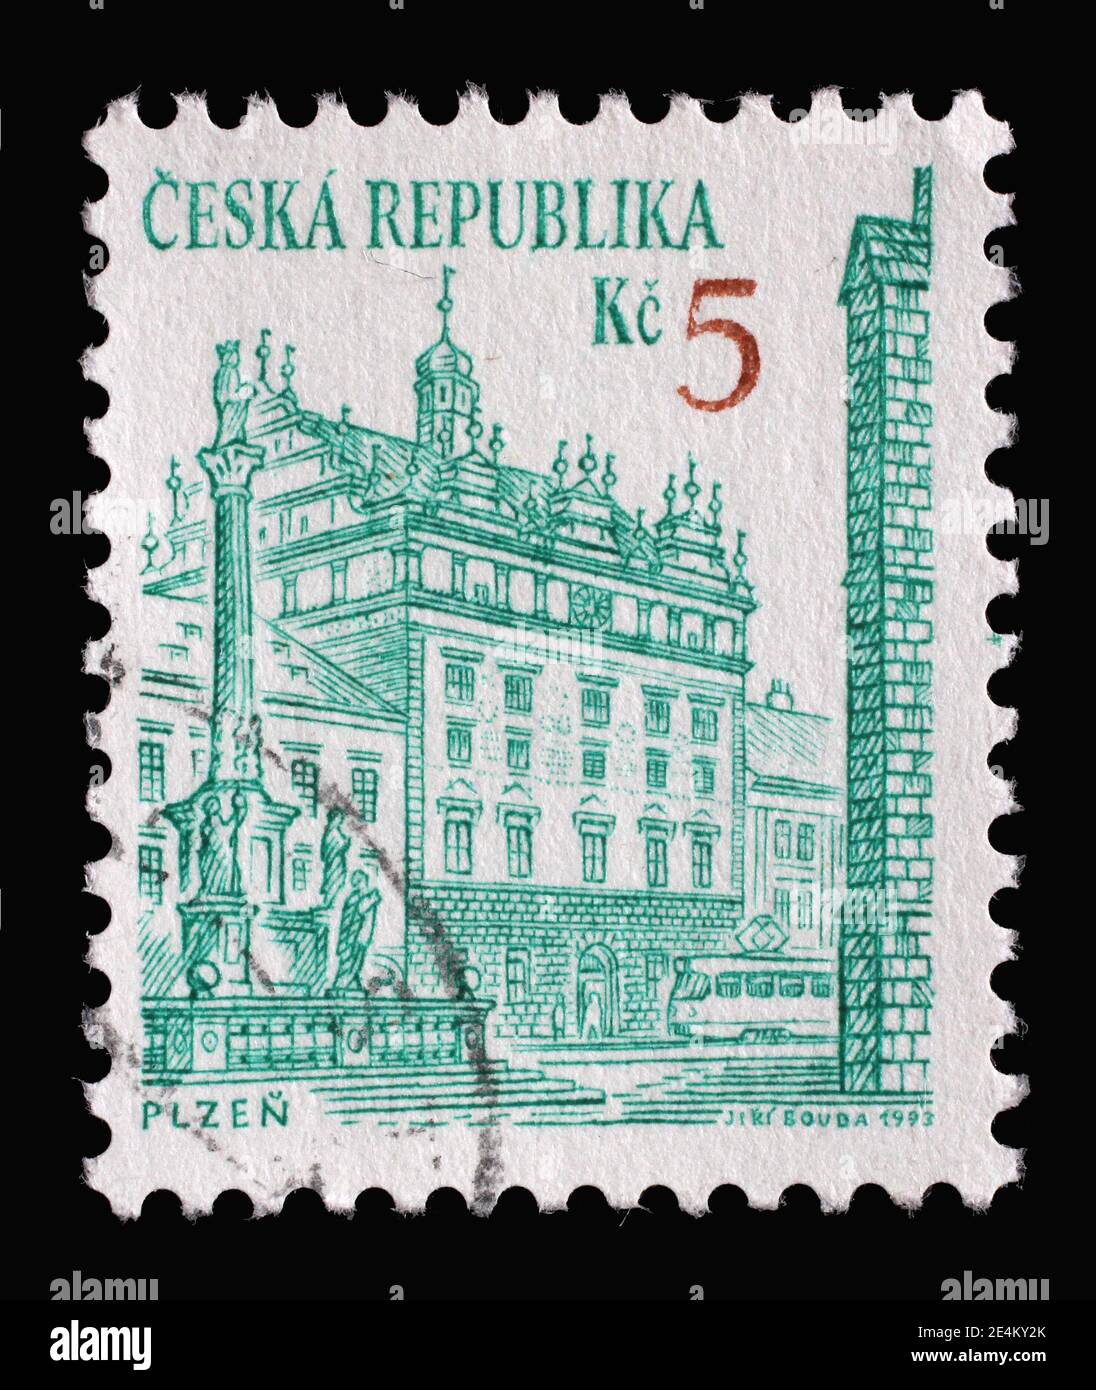 Stamp printed in Czech Republic shows renaissance town hall in Plzen, circa 1993 Stock Photo